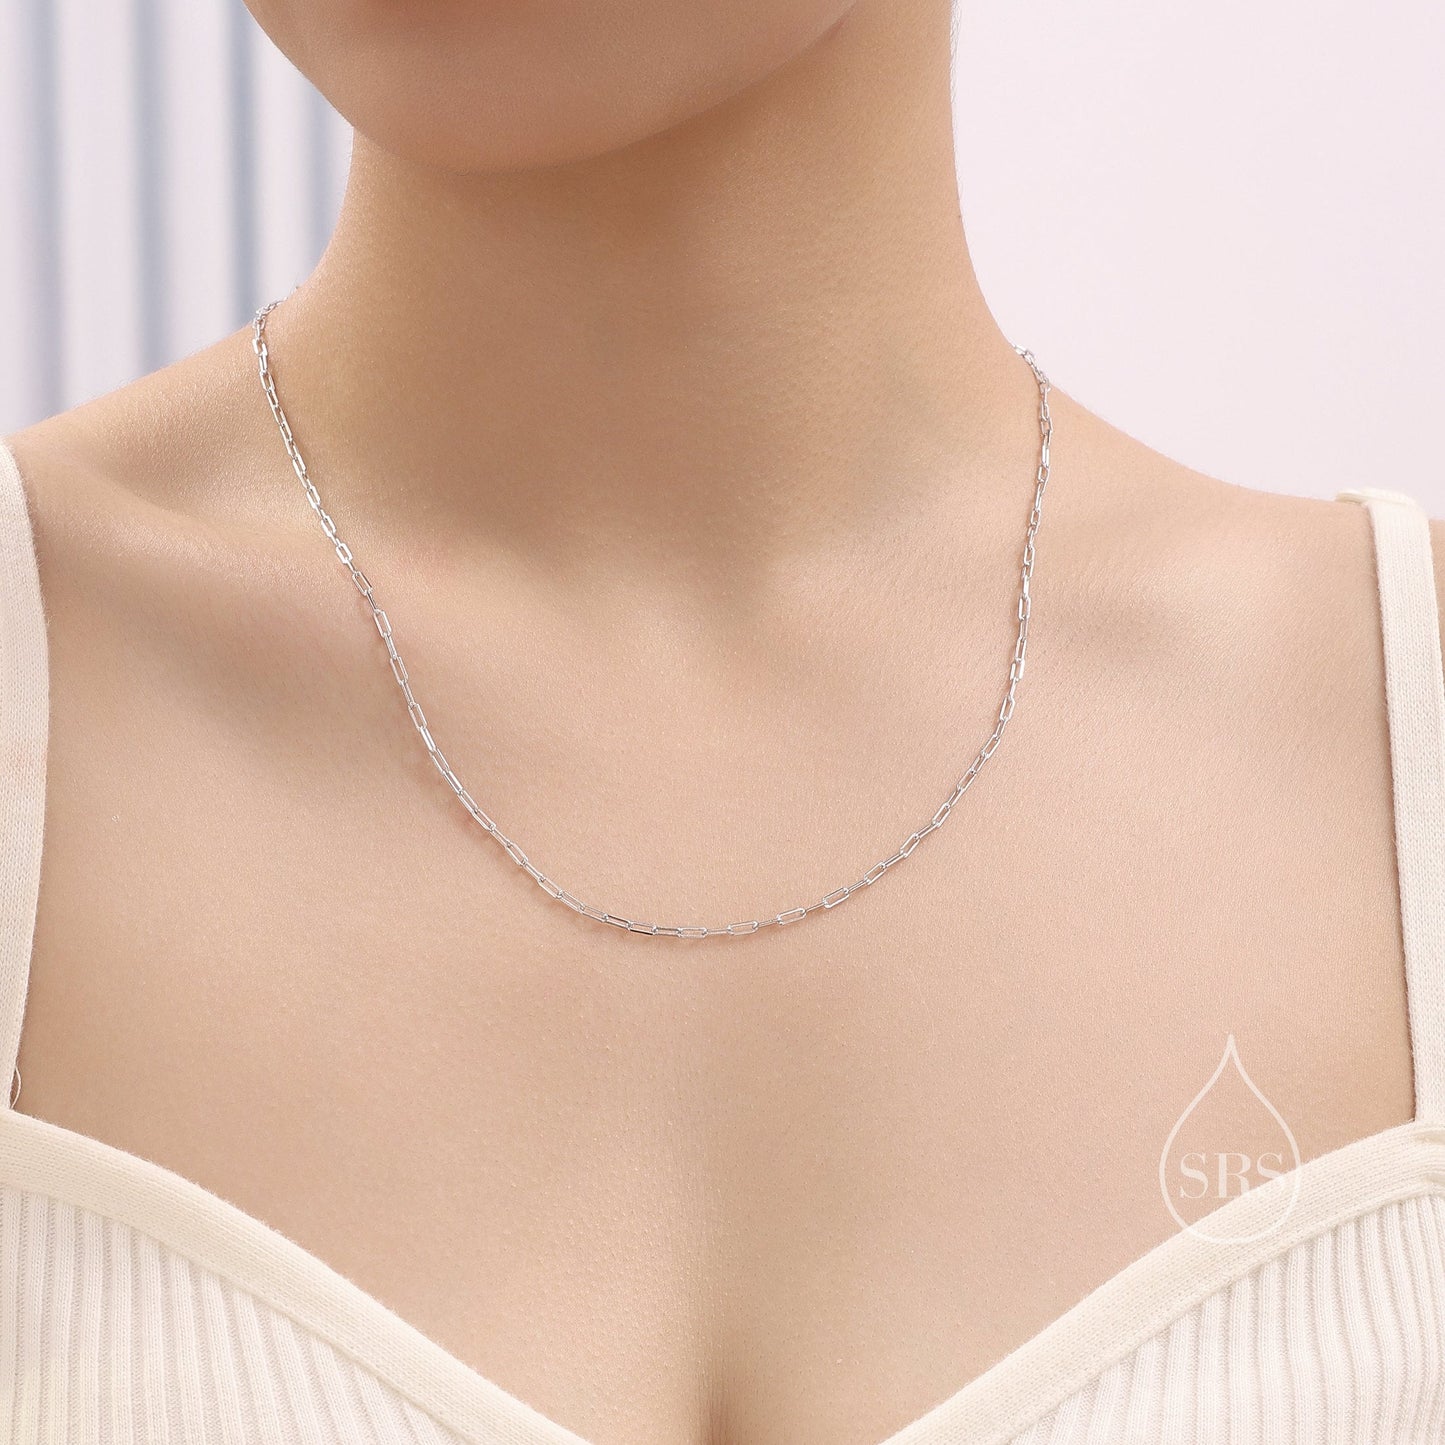 Minimalist Dainty Paperclip Chain Choker Necklace in Sterling Silver, Available in Three Lengths, Silver or Gold, Skinny Necklace